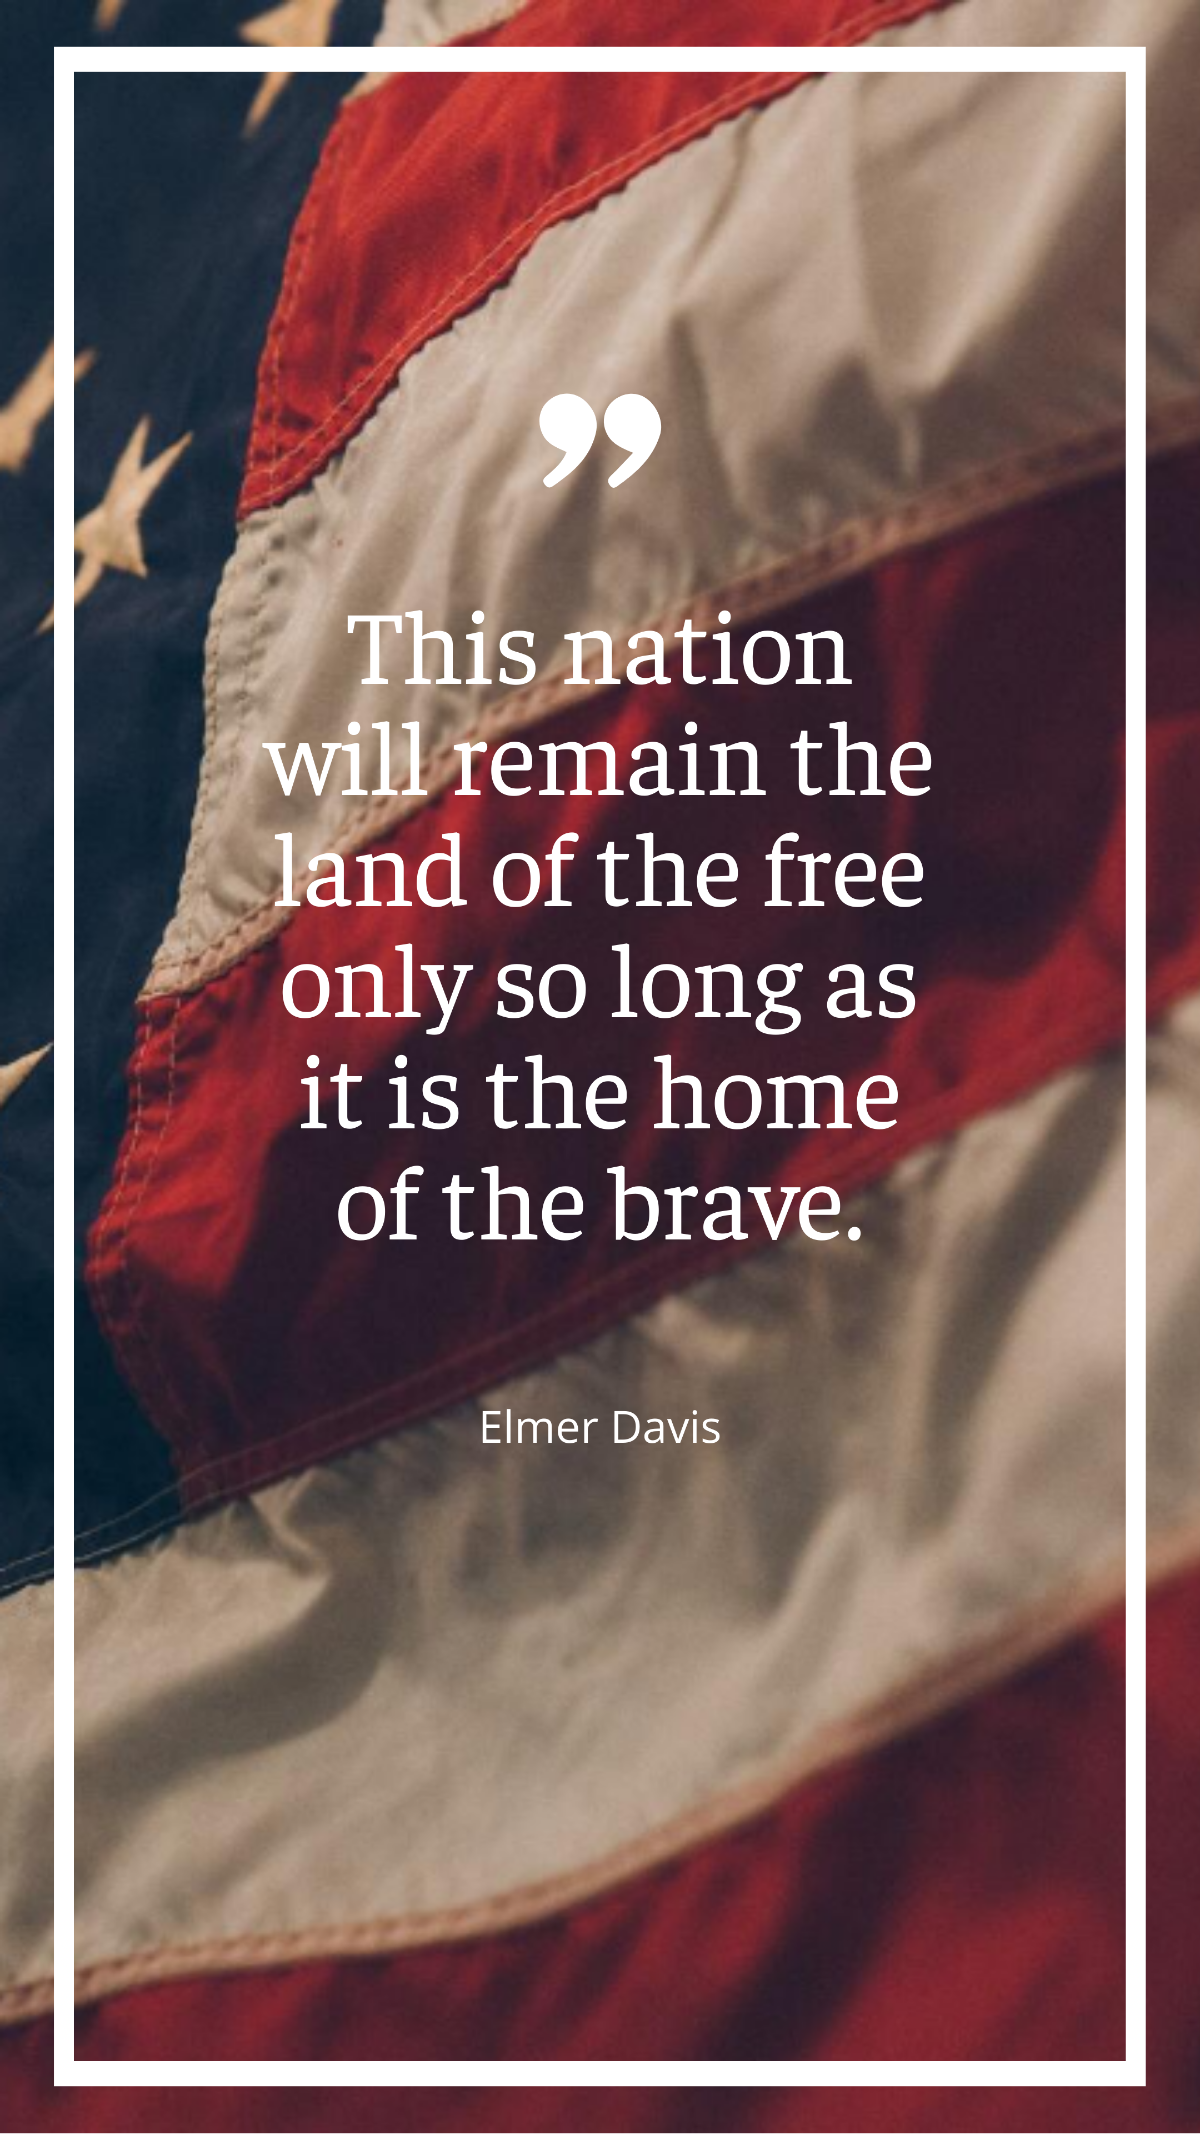 Free Elmer Davis - “This nation will remain the land of the only so long as it is the home of the brave.” Template